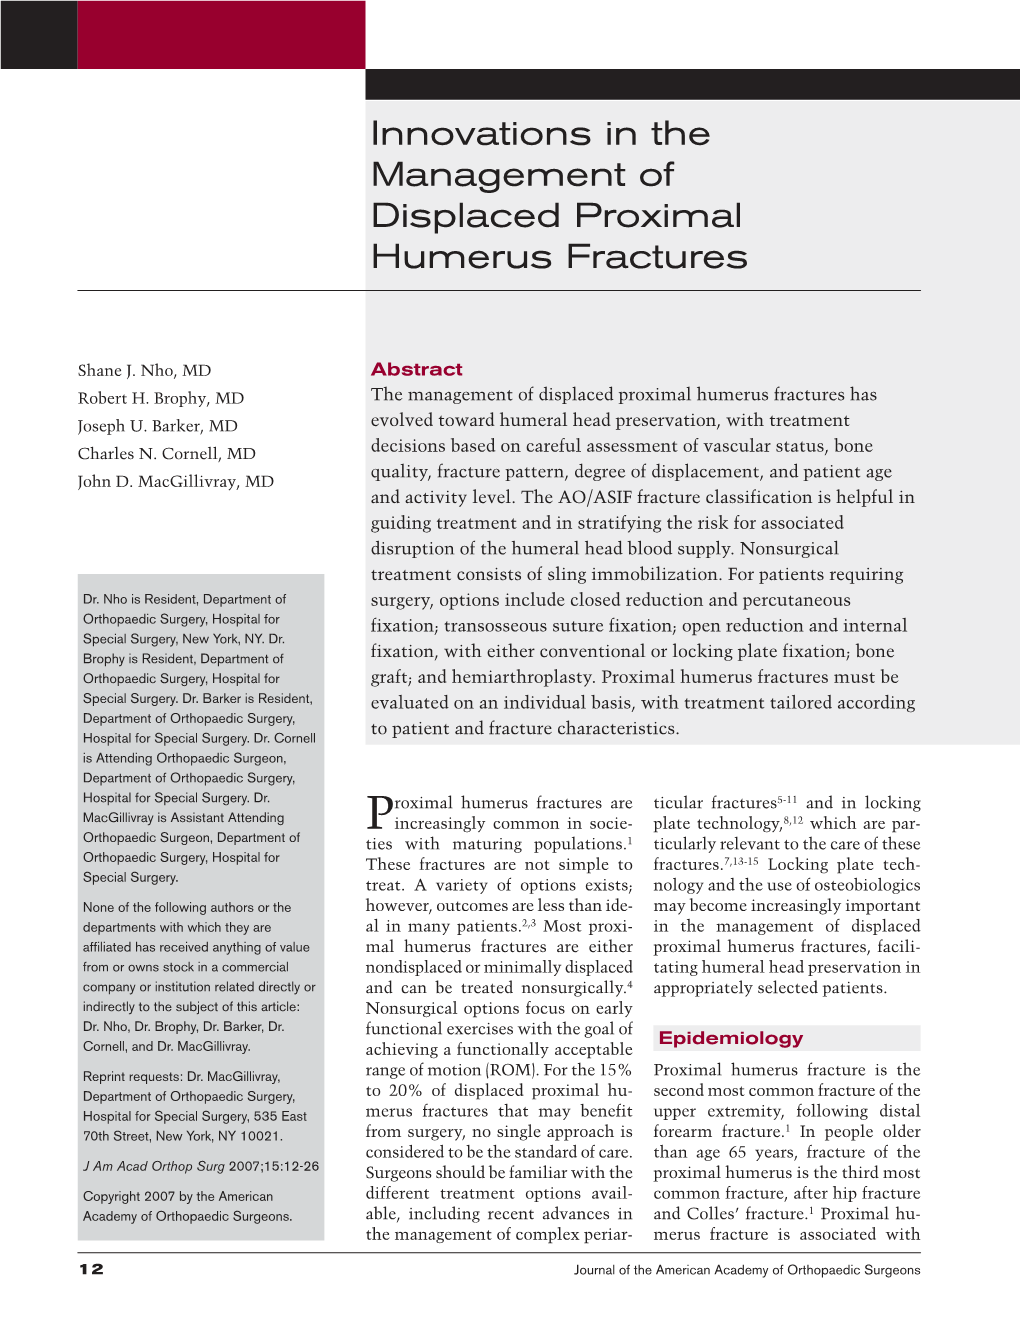 Innovations in the Management of Displaced Proximal Humerus Fractures